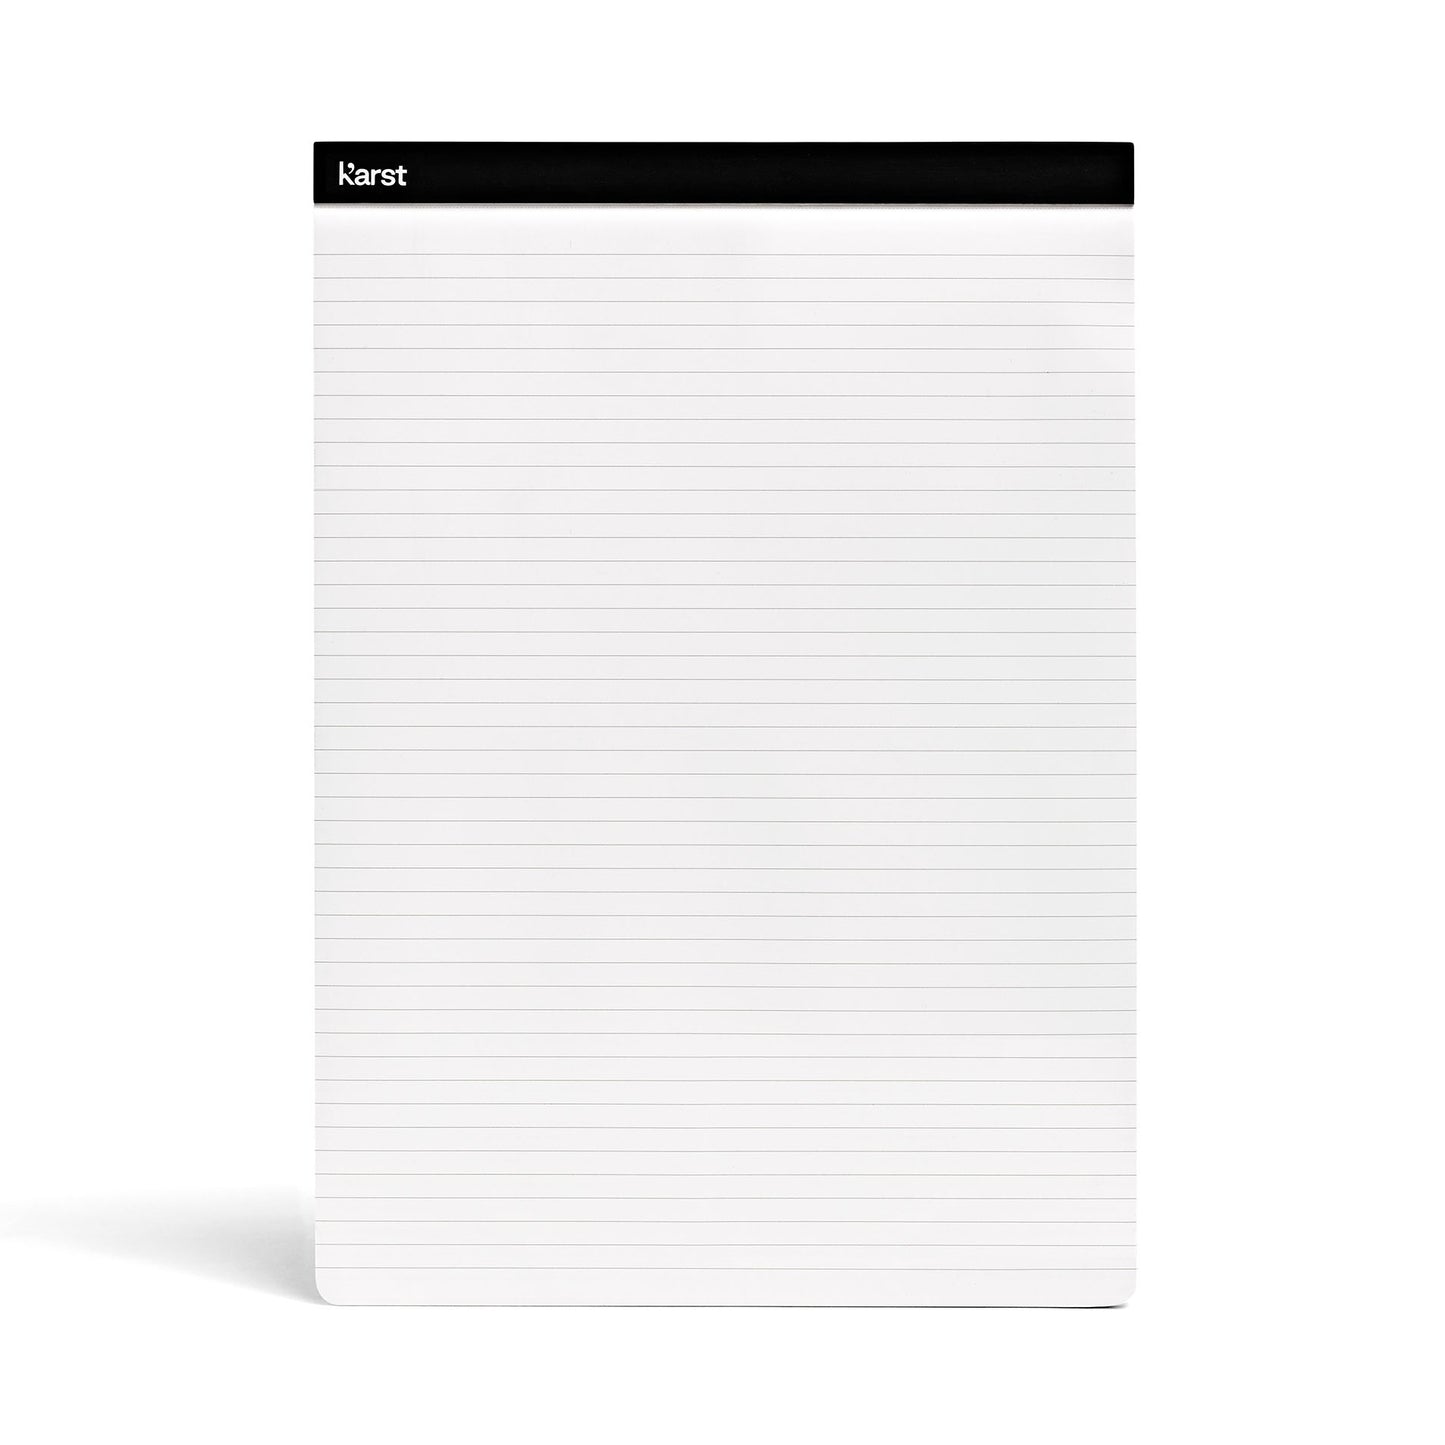 Karst - Stone Paper Collection - Notepad A4